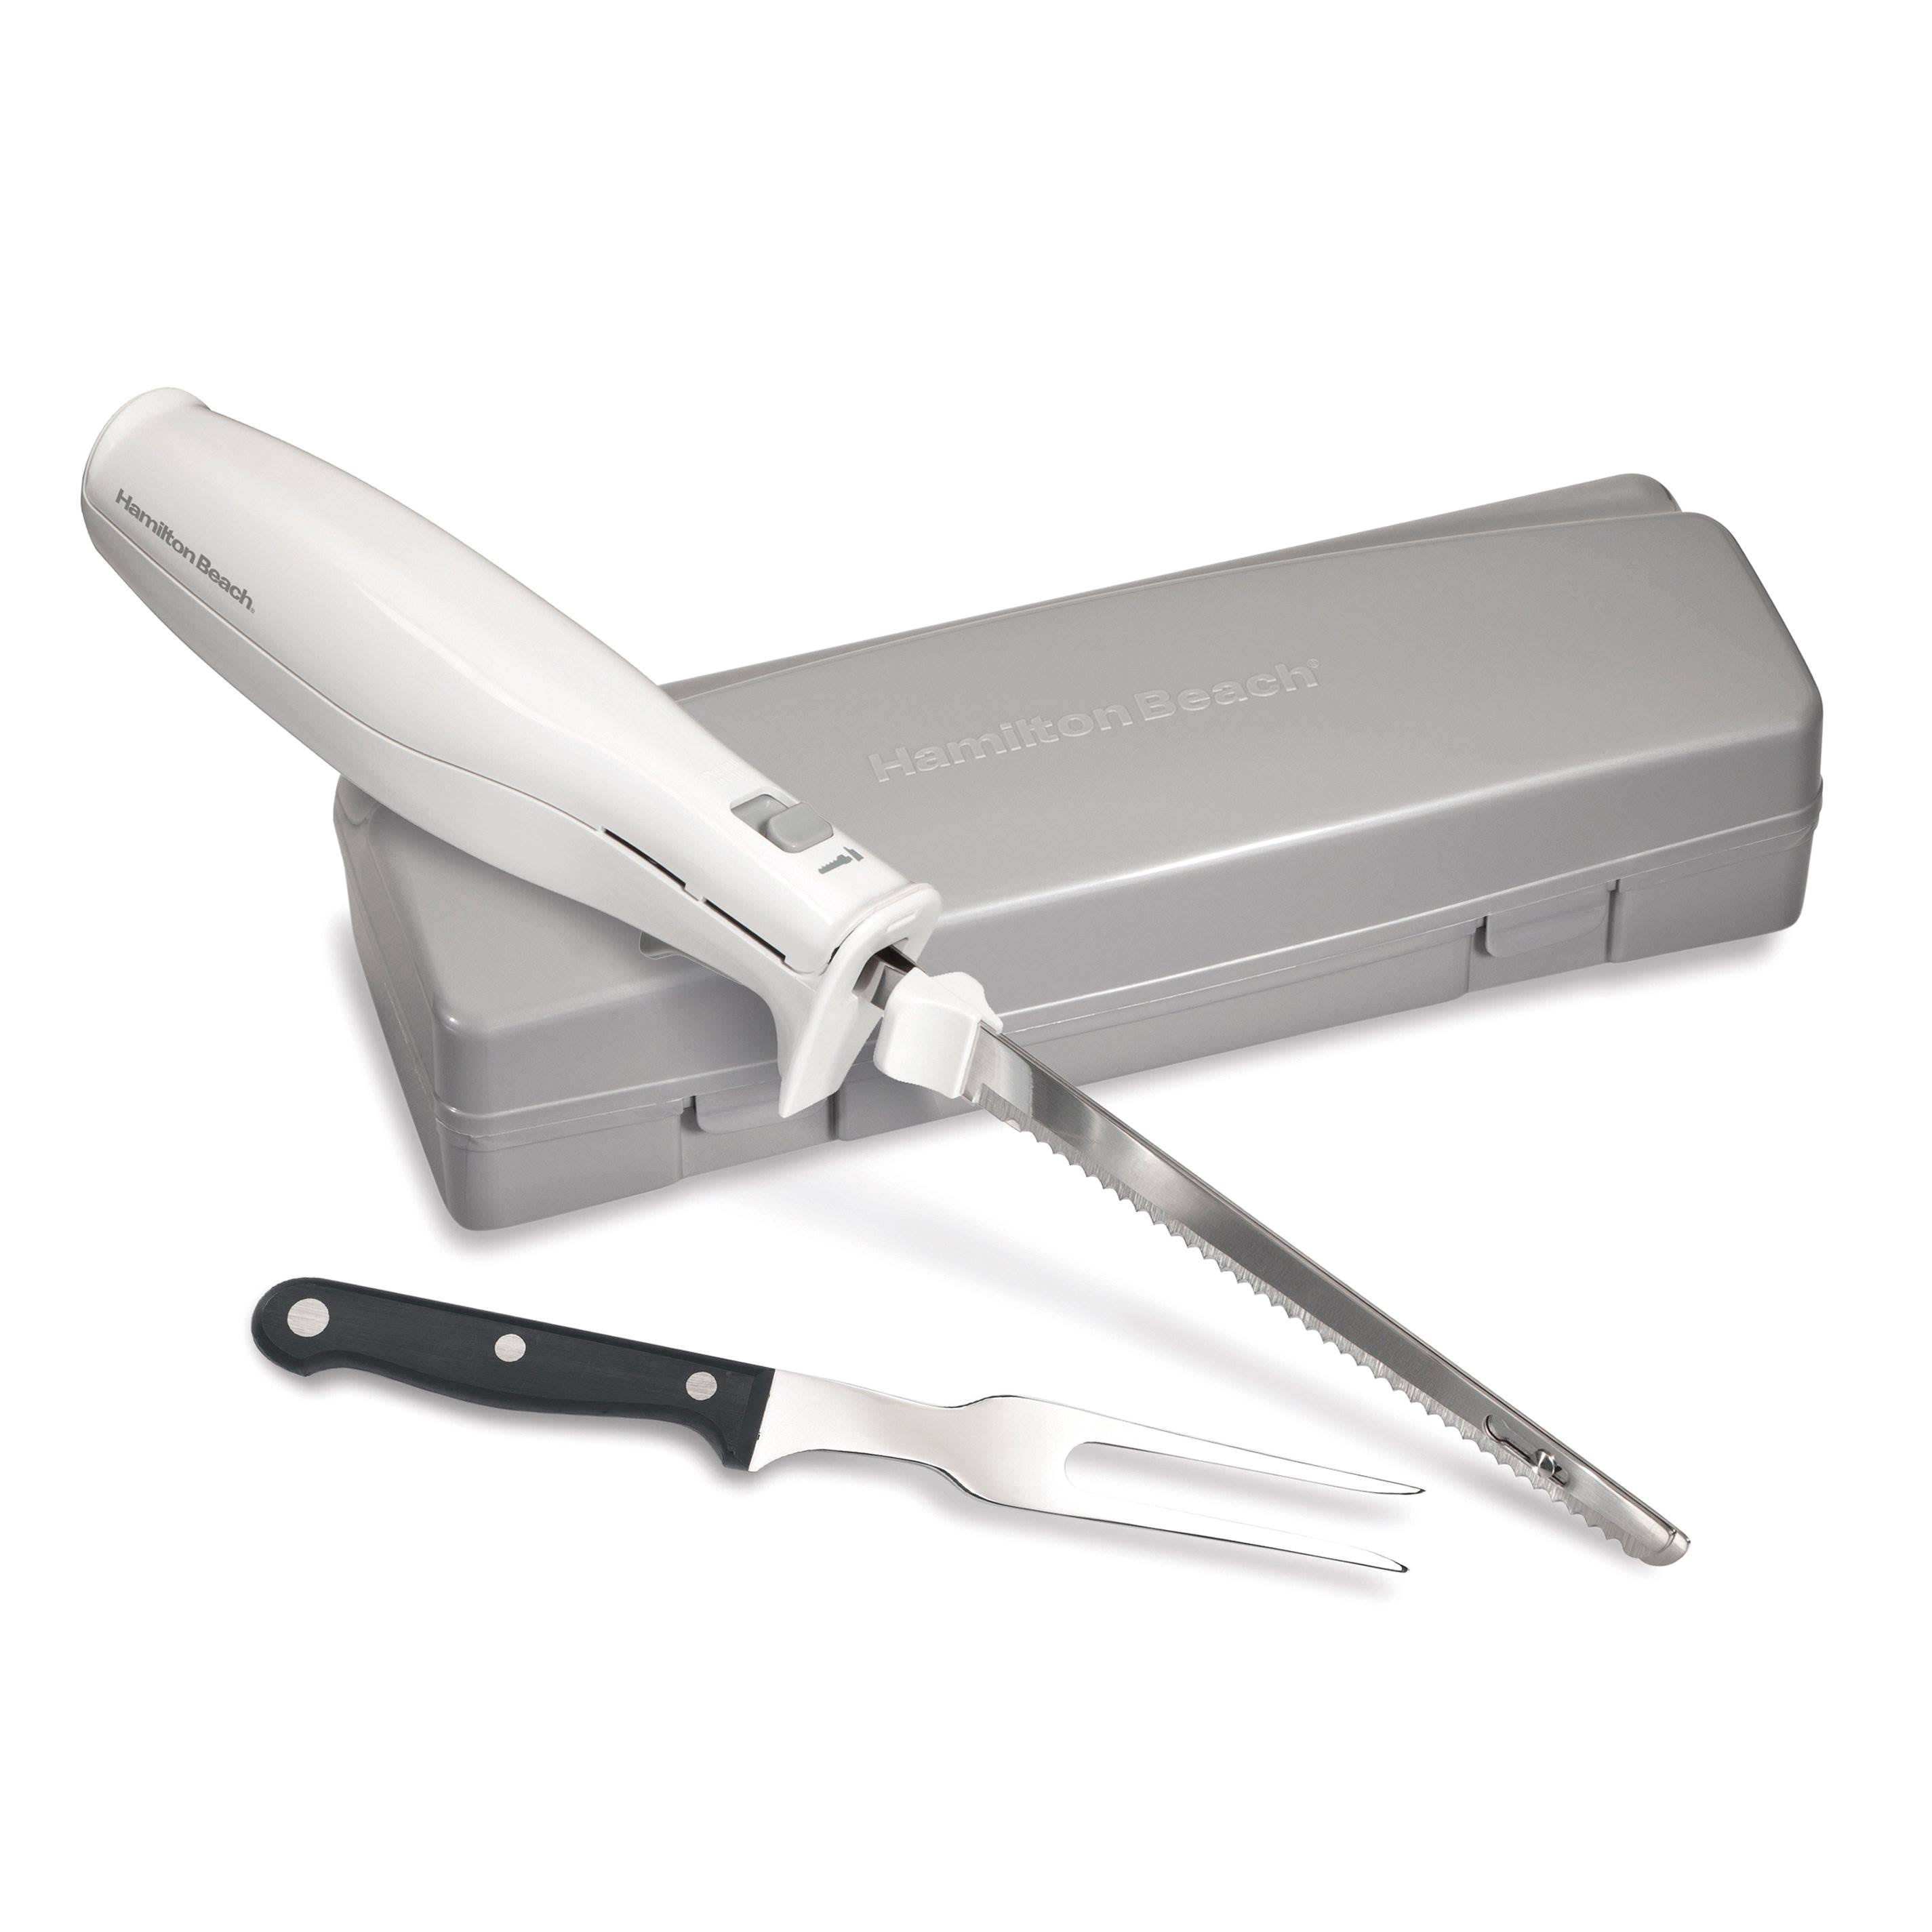 Hamilton Beach 74250 Carve 'n Set Electric Knife And Carving Fork Set - With Case, White